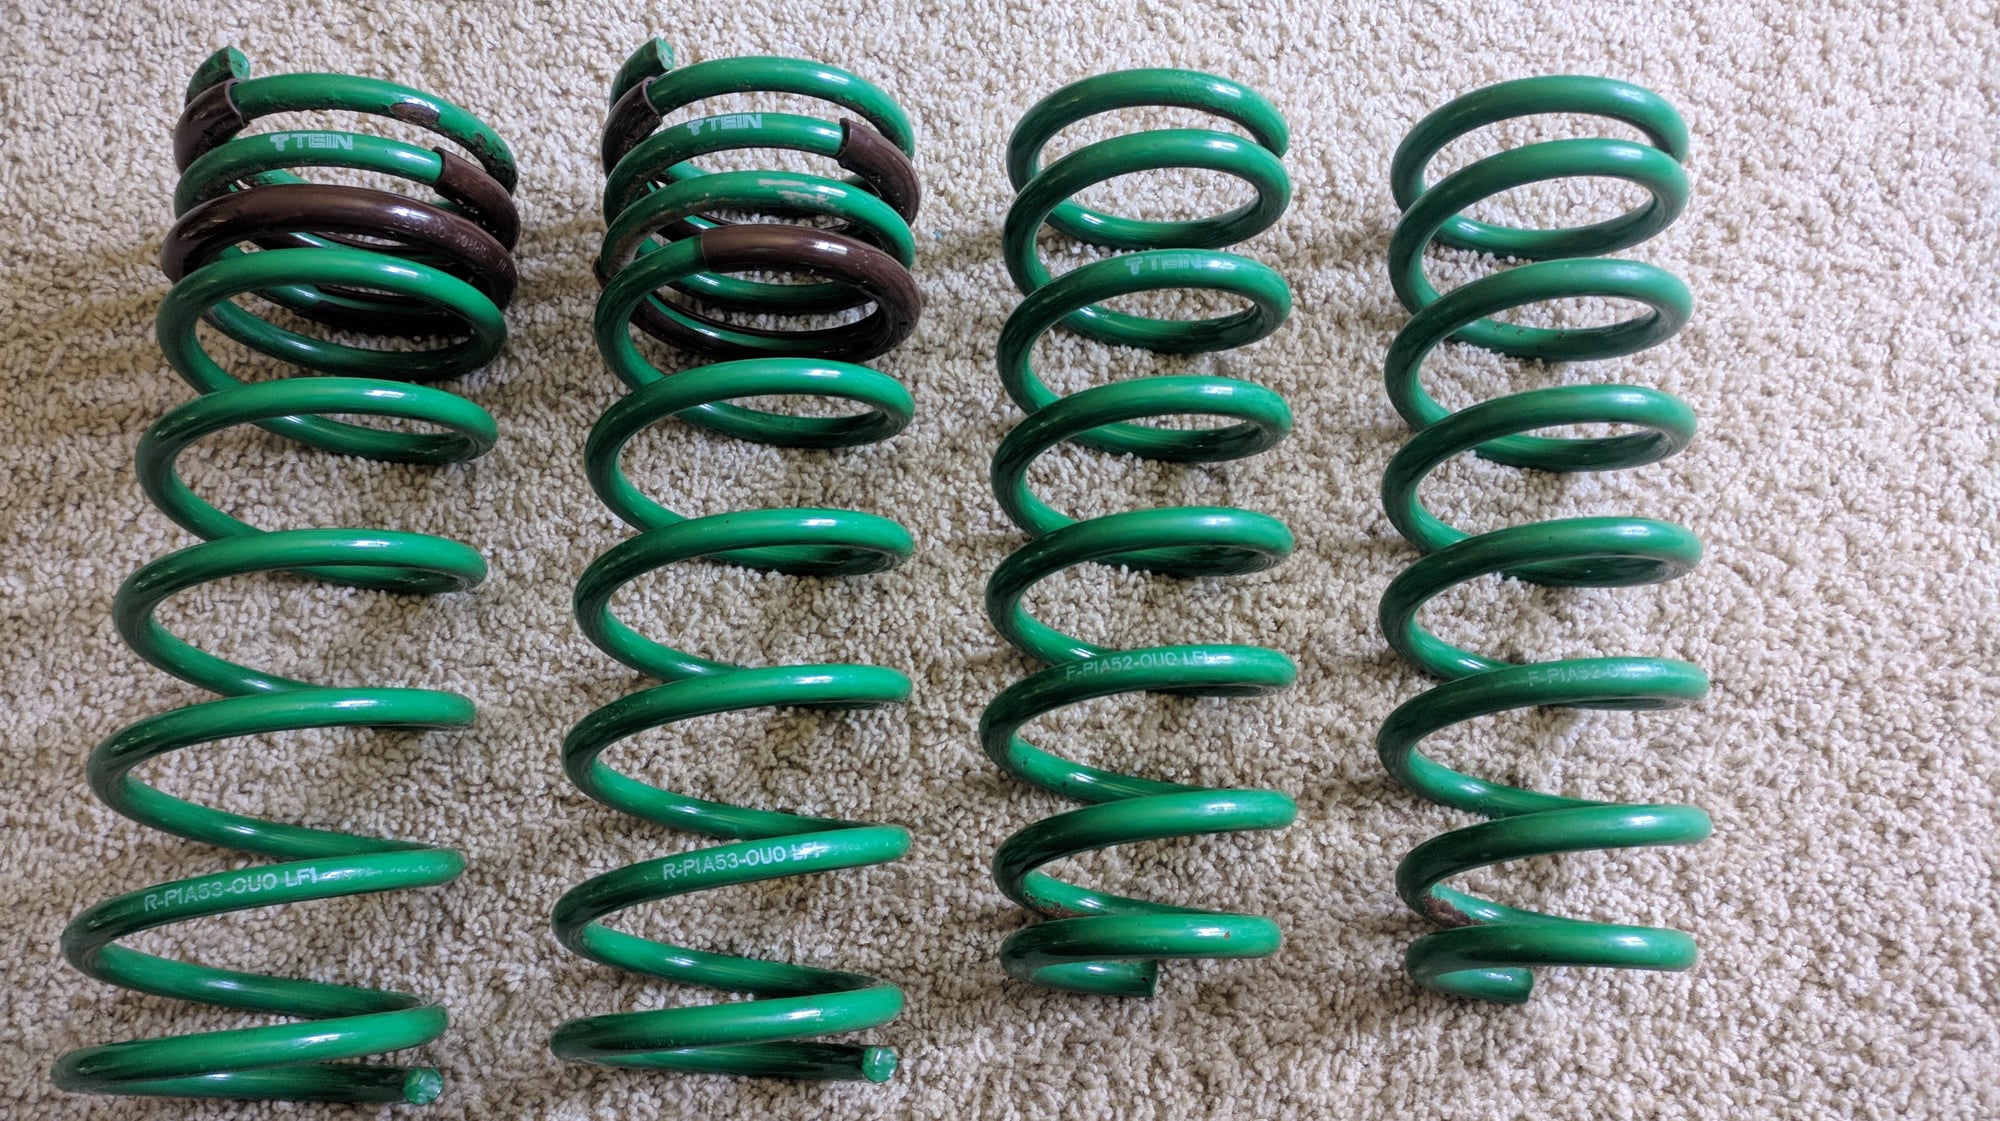 Steering/Suspension - SOLD: Tein Stech Acura TL (04-08) Lowering Springs SKA52-AUB00 - Used - 2004 to 2008 Acura TL - Sugarcreek, OH 44681, United States